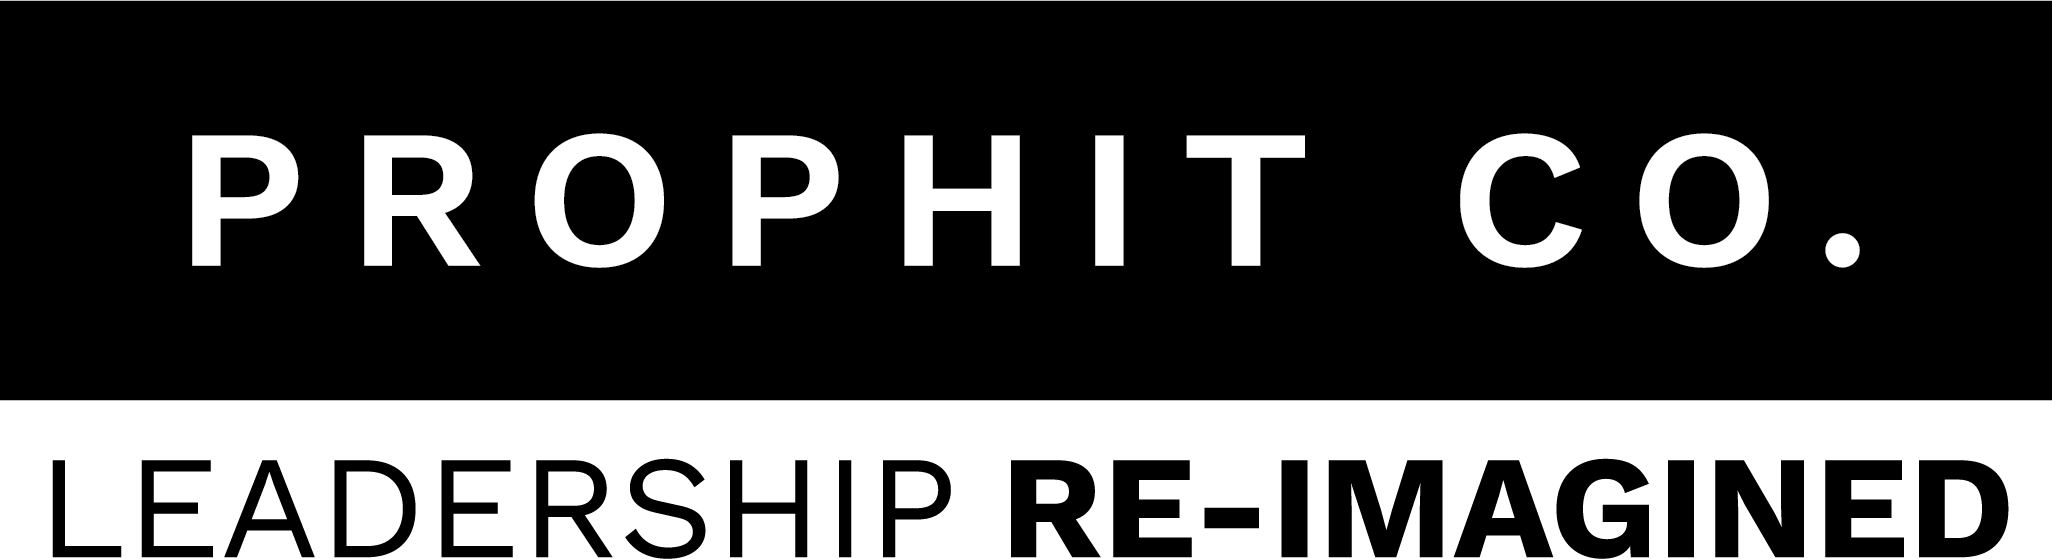 Prophit Co. Logo_with tag_black_re-imagined.png